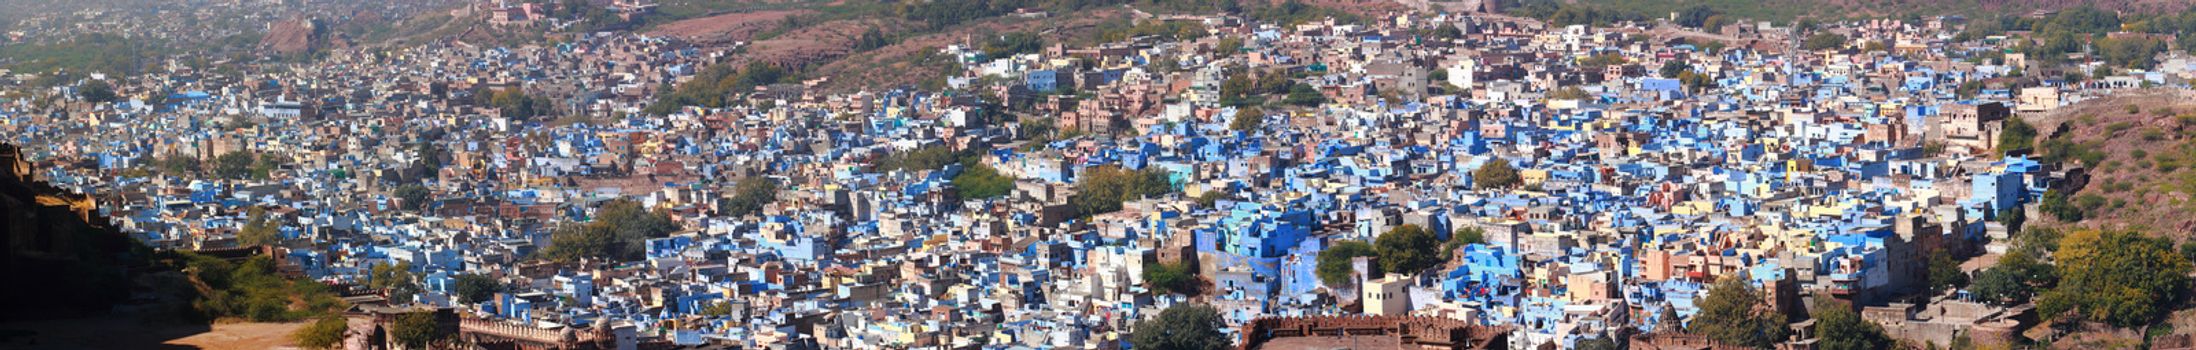 Top view panorama of Jodhpur City or the blue city, Rajasthan, India